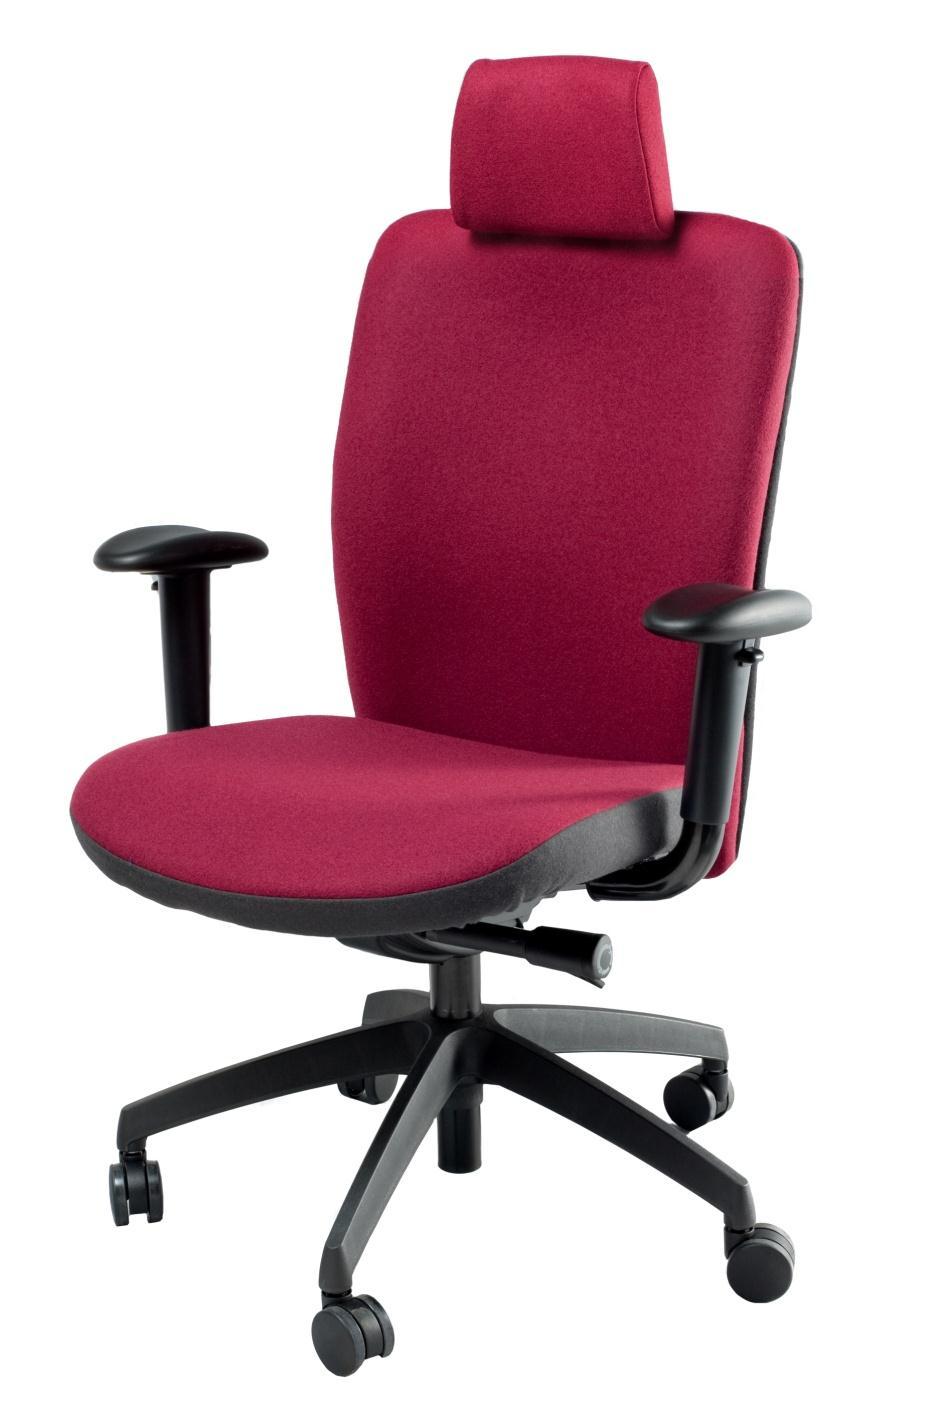 Balmoral BA01 High back, fully upholstered, ergonomic task chair with headrest Features: - Synchronous mechanism. Side operated bodyweight tension control.